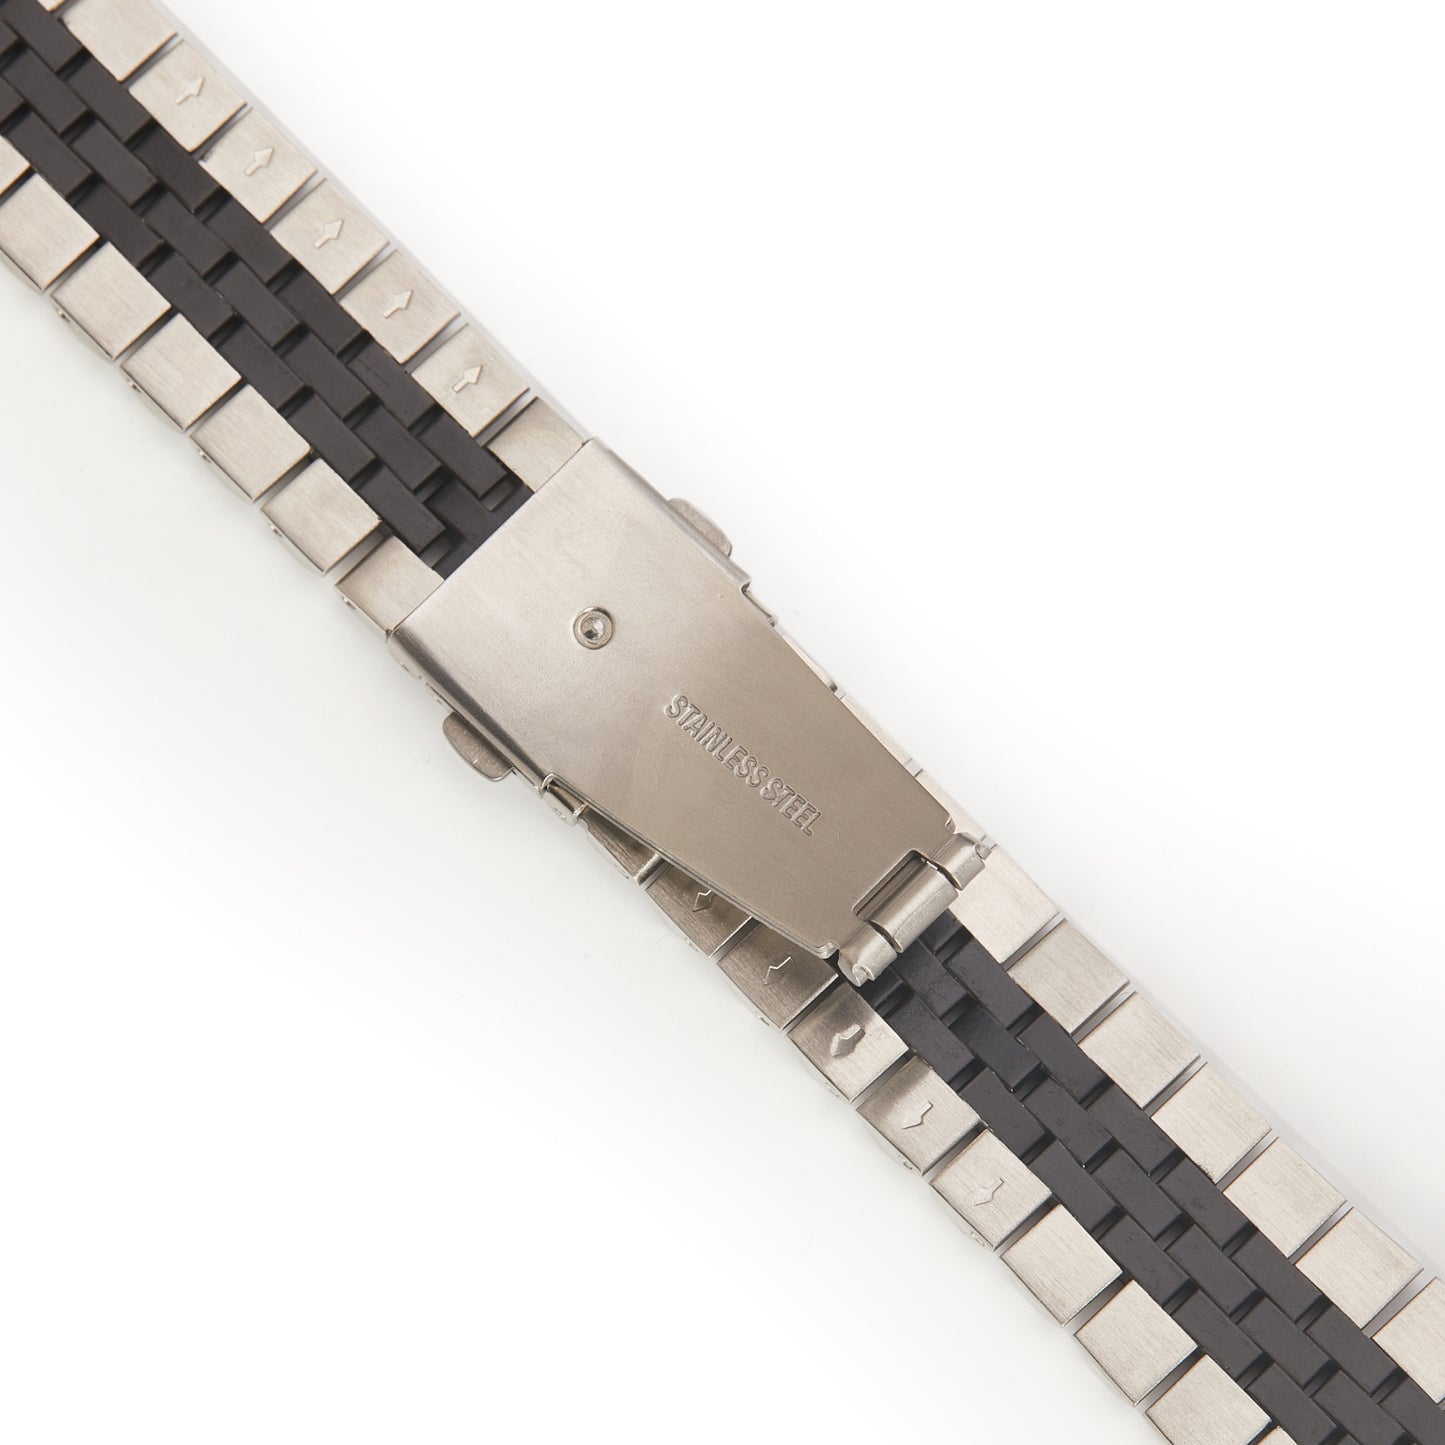 Stainless Steel Link Bracelet Band - The Perth in Silver and Black - Compatible with Apple Watch Size 38mm to 41mm - Friendie Pty Ltd